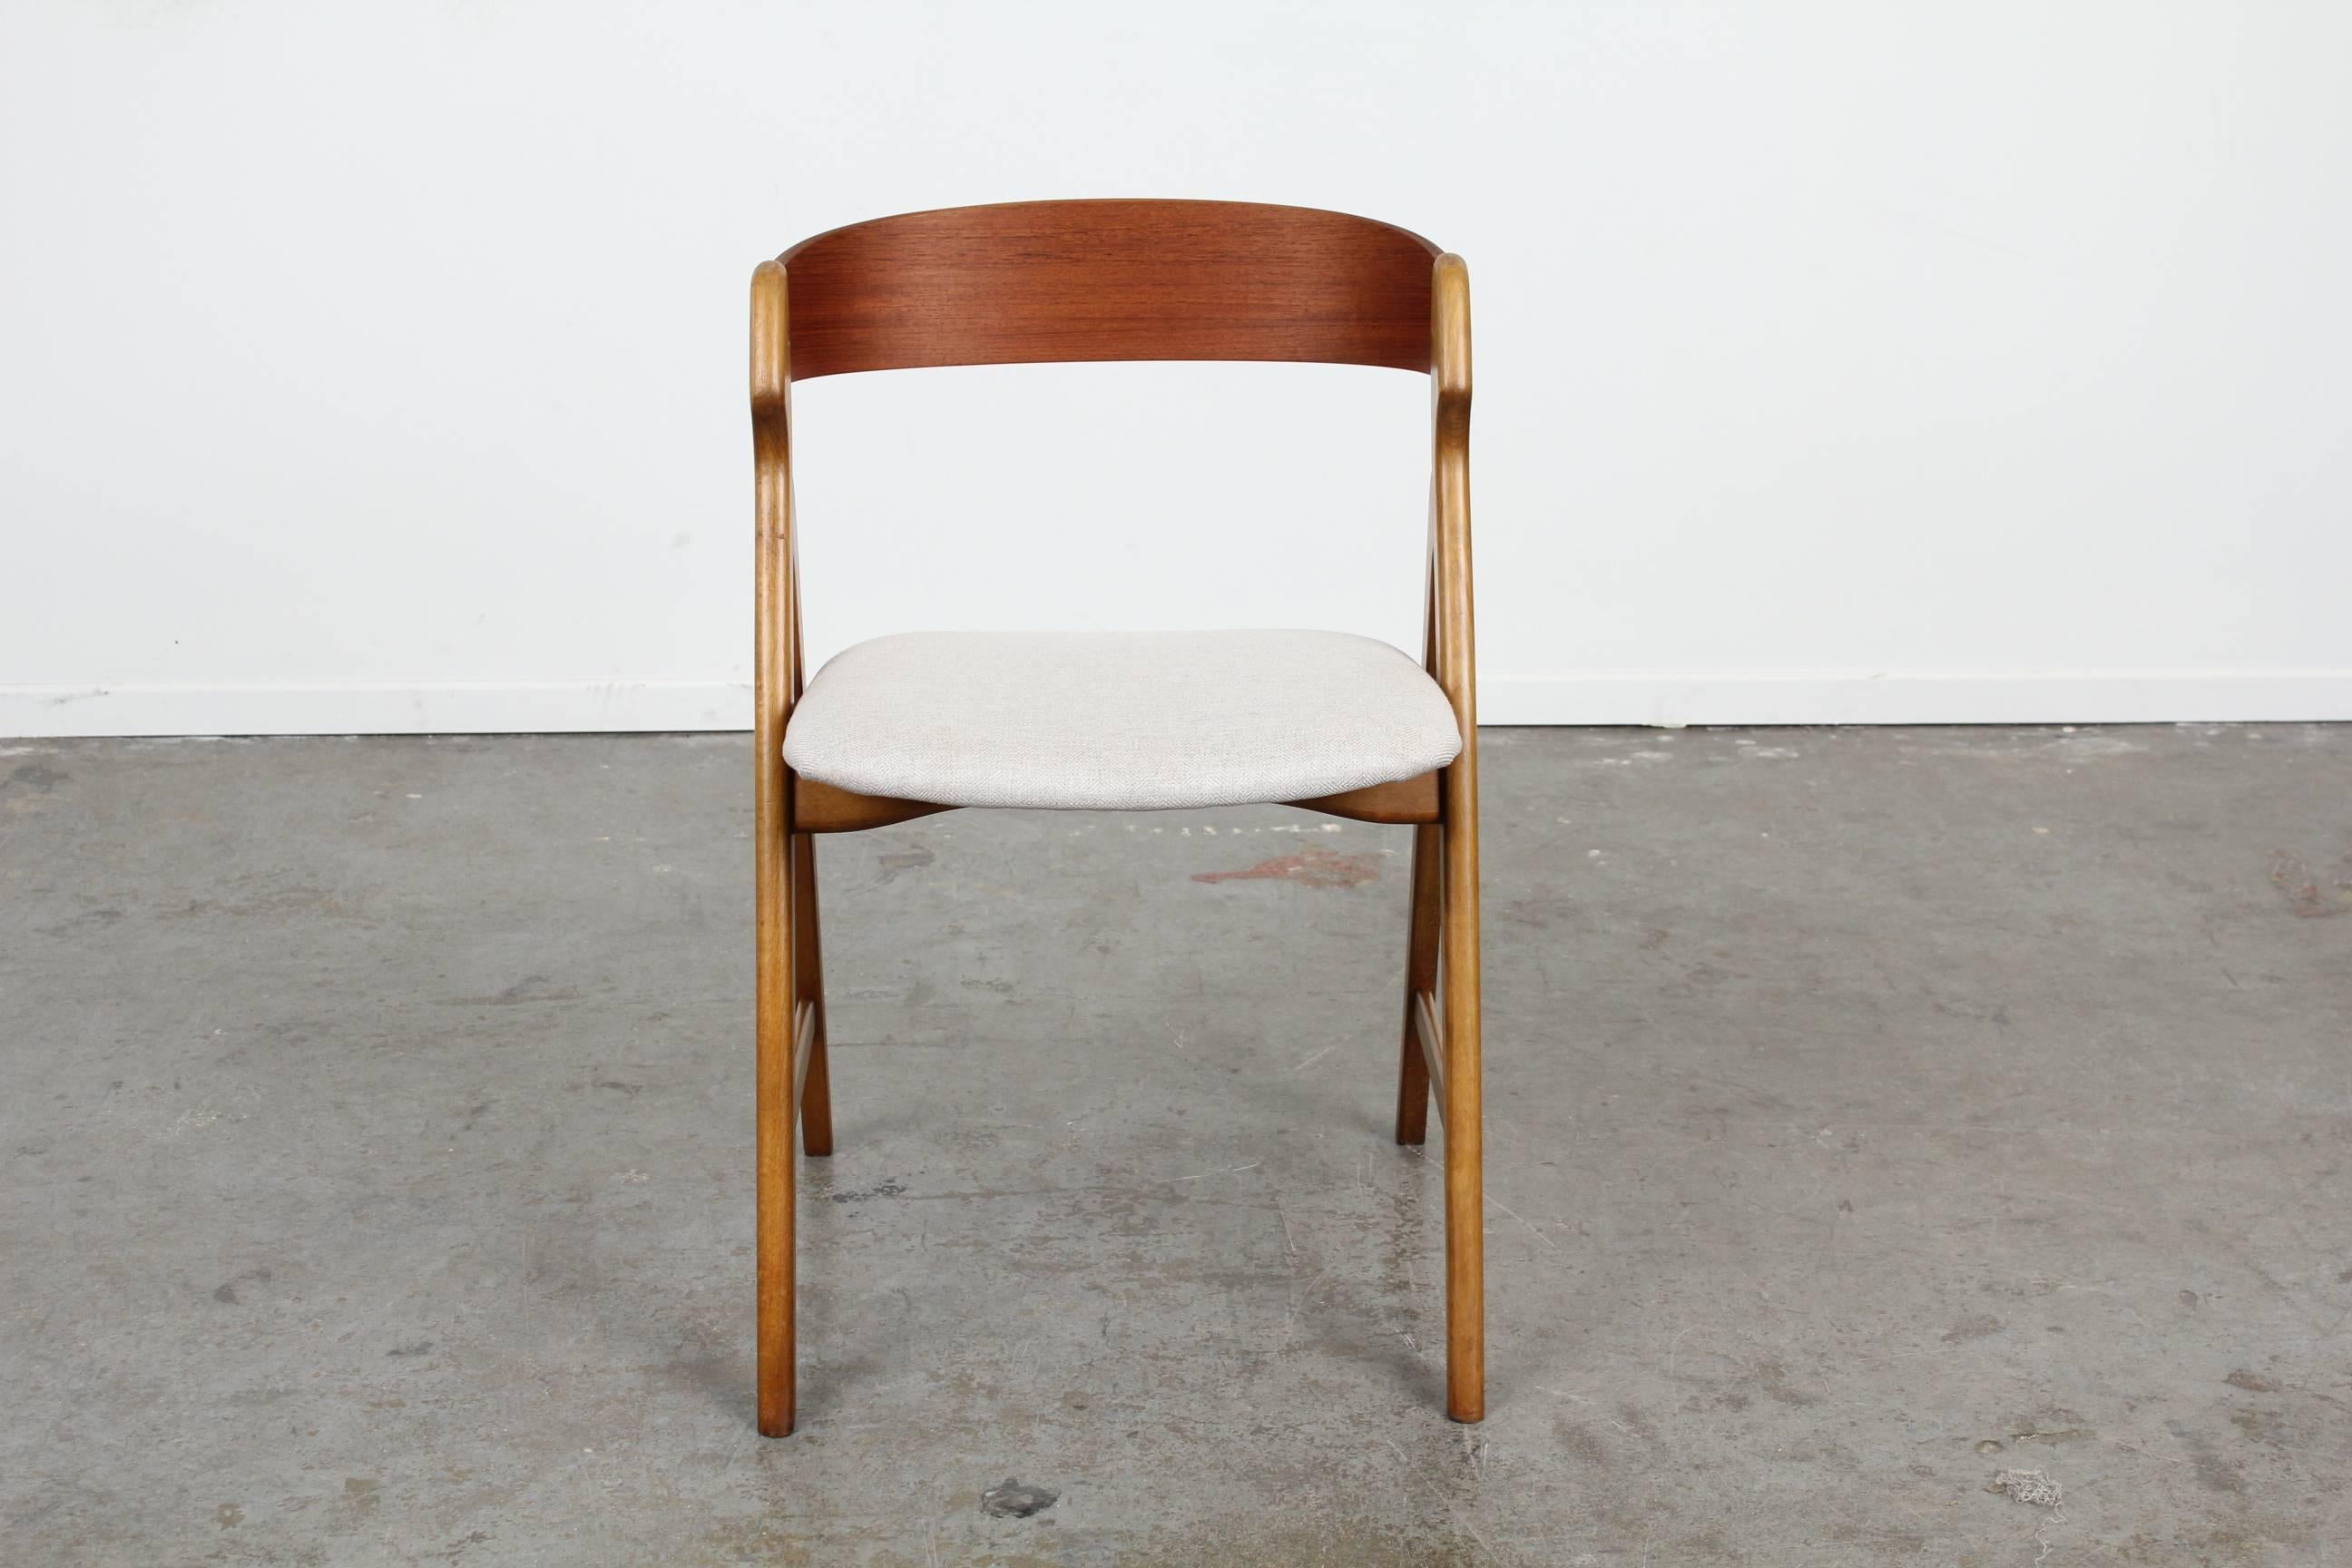 Set of 4 Mid Century Danish Modern Teak Dining Chairs by Henning Kjaernulf, newly upholstered and refinished.